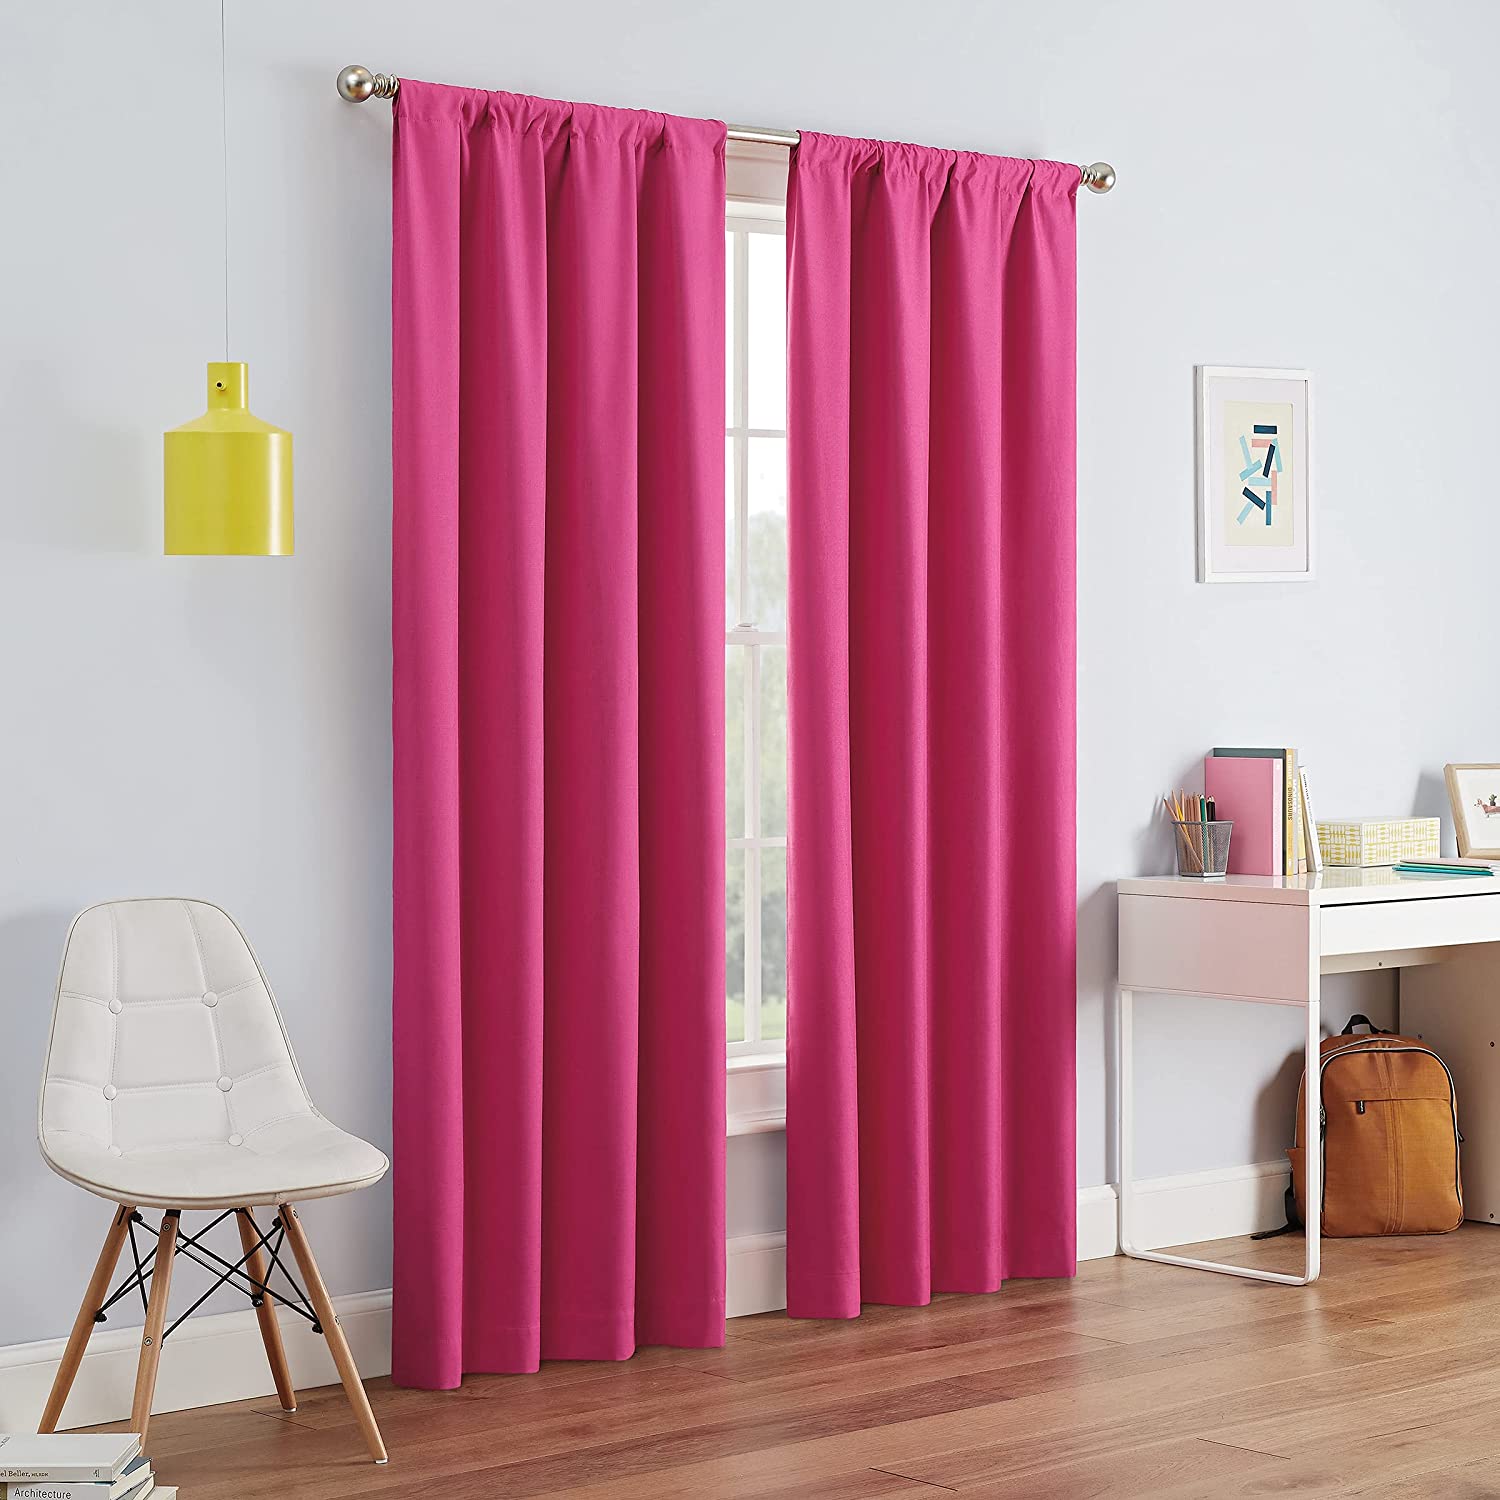 Amazon Blackout & Sheer Curtains and Kitchen Valances on Sales Starting from $3.67